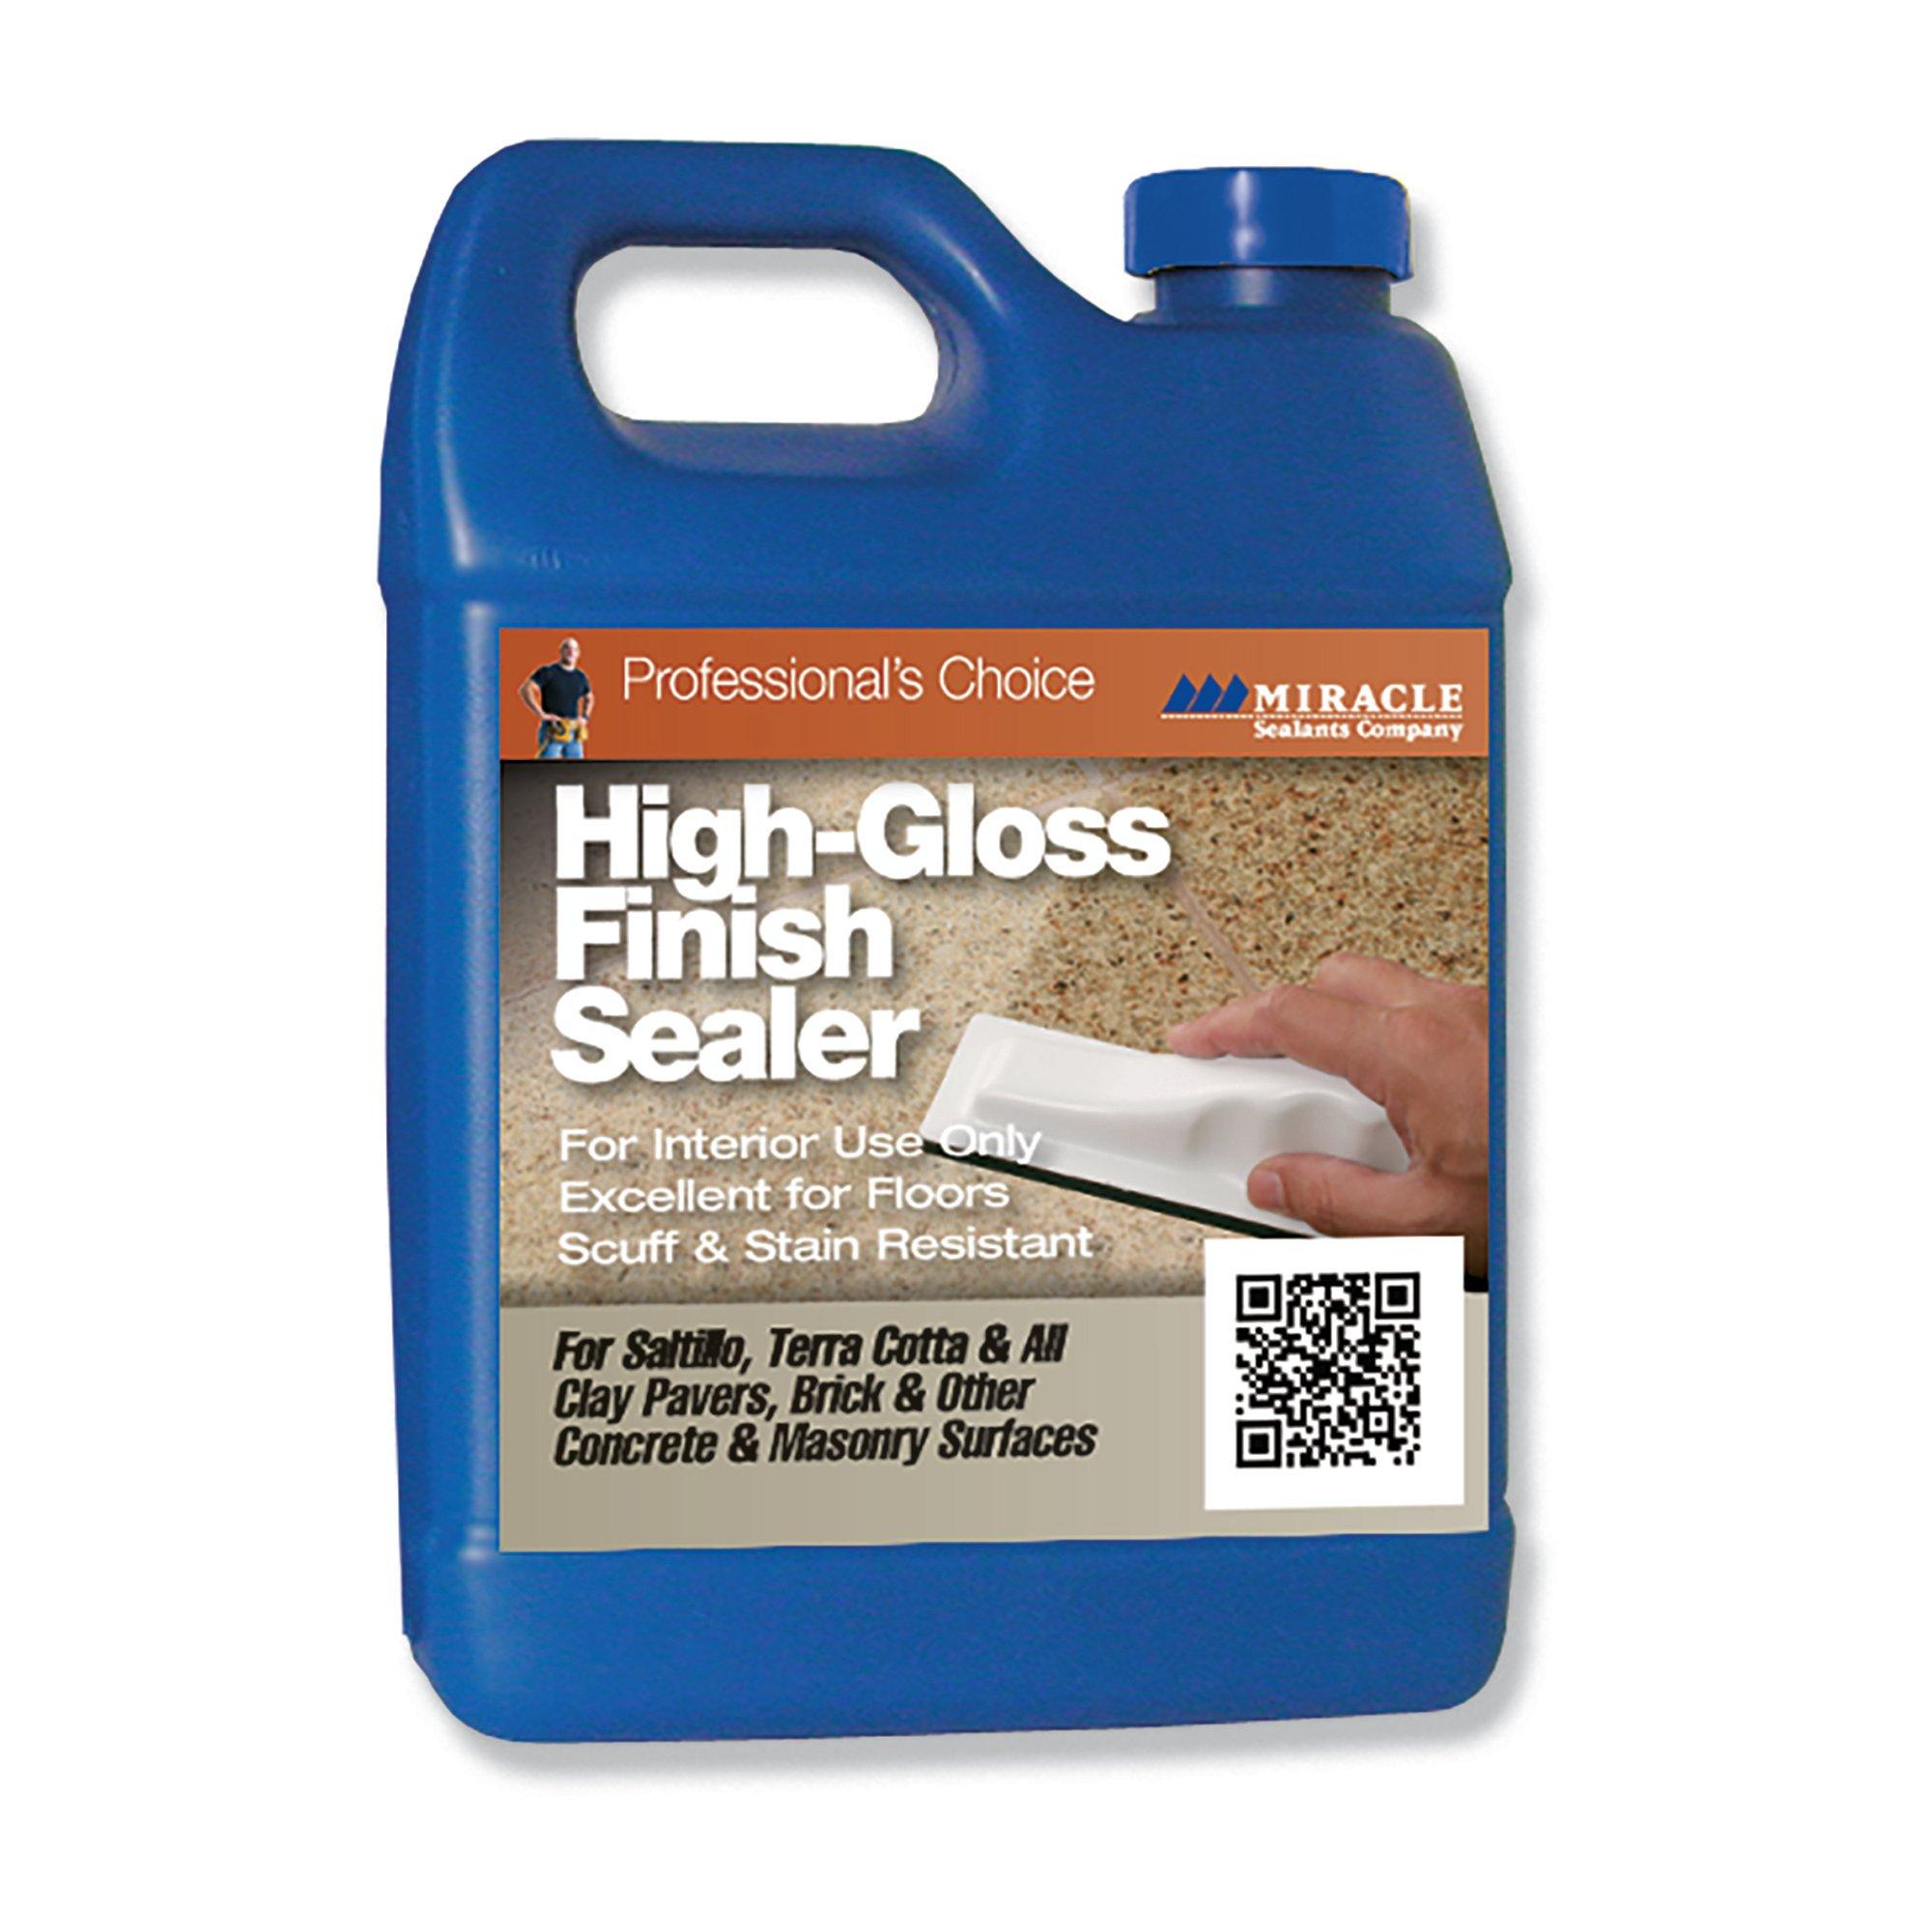 100137694 Miracle High Gloss Finish Sealer 1?fmt=auto&qlt=85